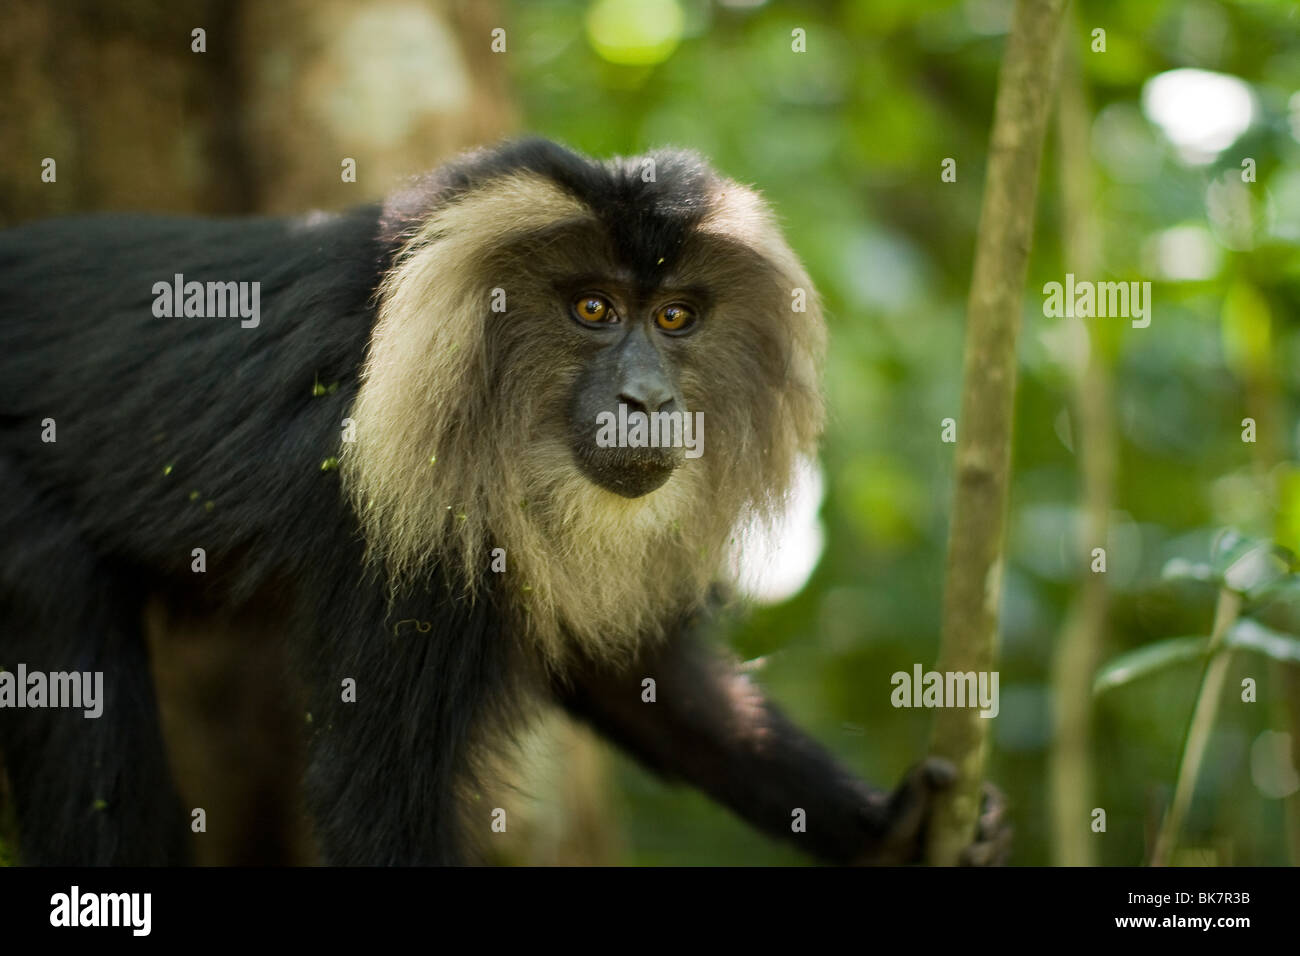 Lion tailed macaque in Tamil Nadu, India Stock Photo - Alamy